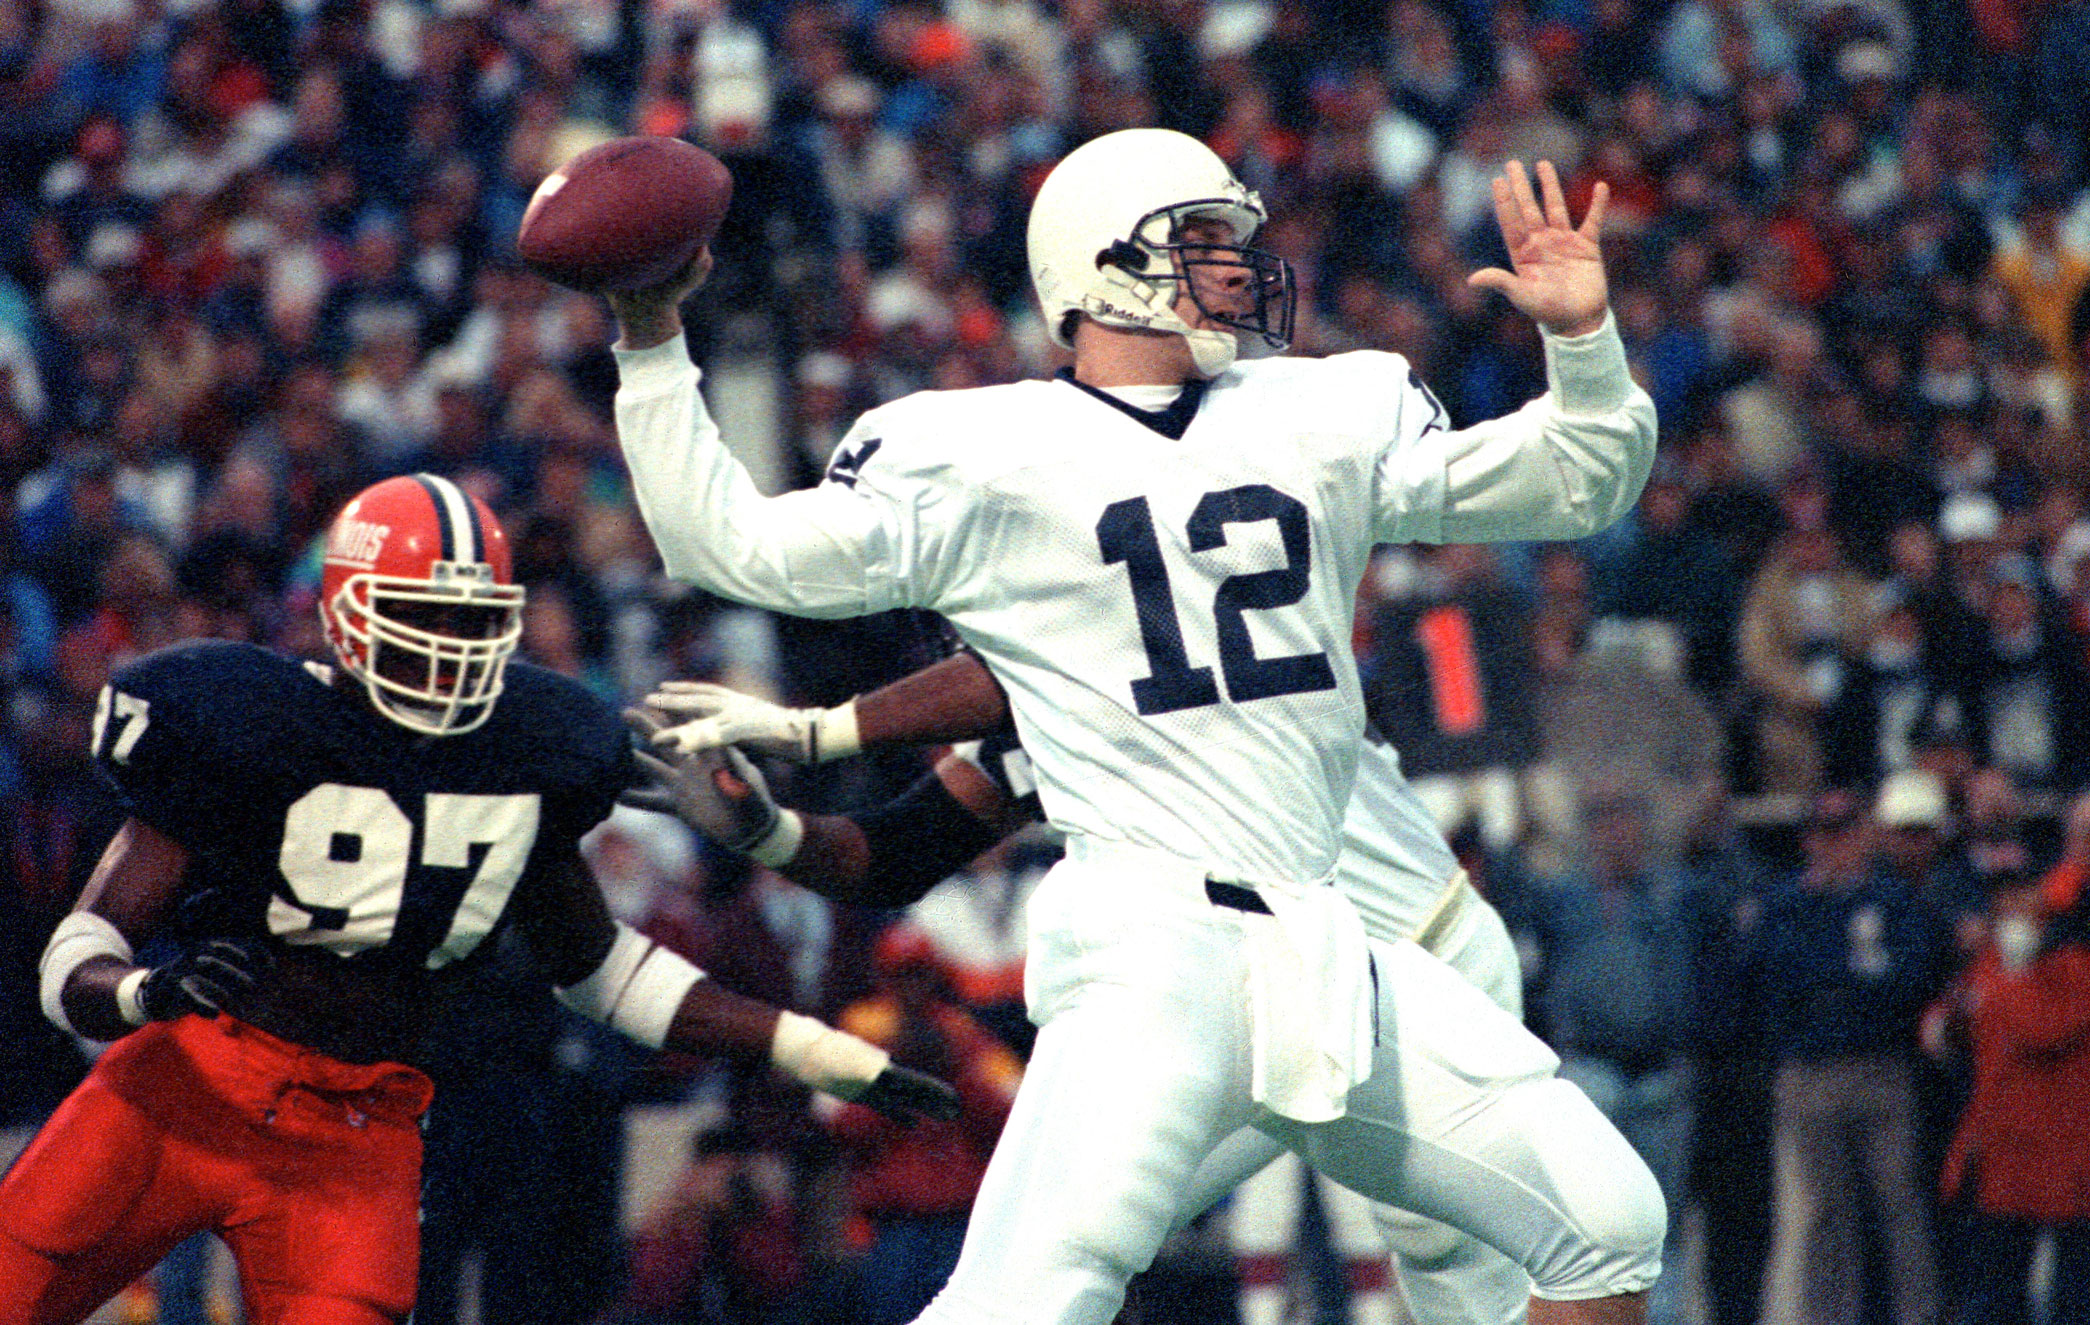 Kerry Collins about to throw the ball, photo by Steve Manuel '84 Lib, '92 MA Com